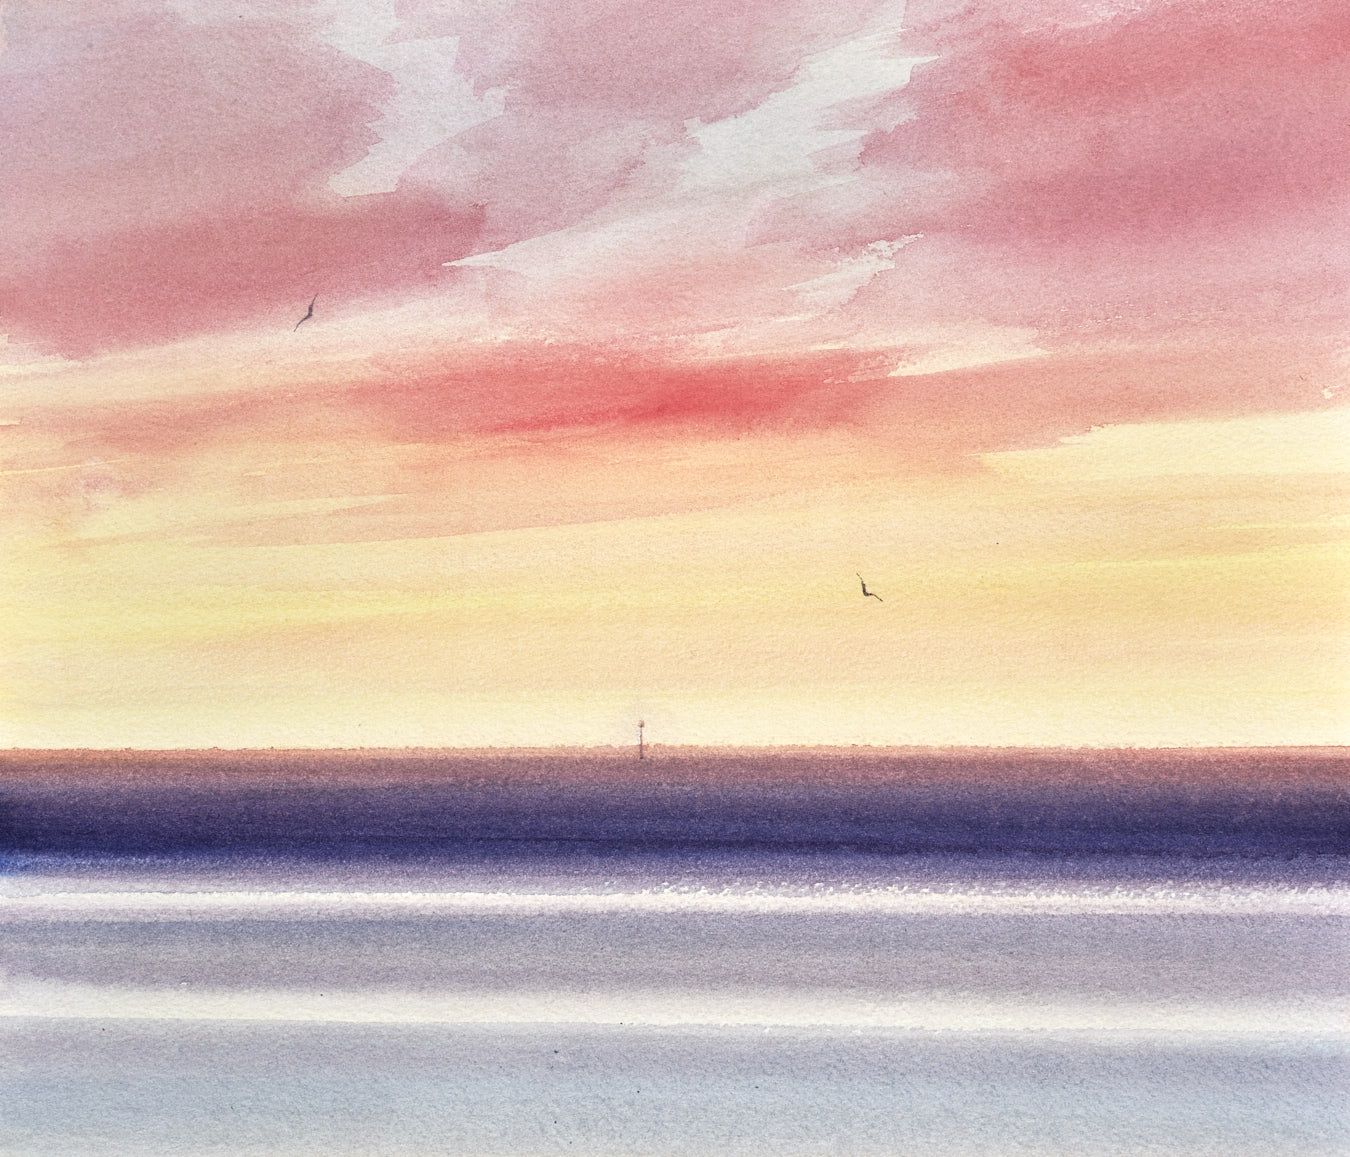 Large image of Twilight over the tide original watercolour painting by Timothy Gent